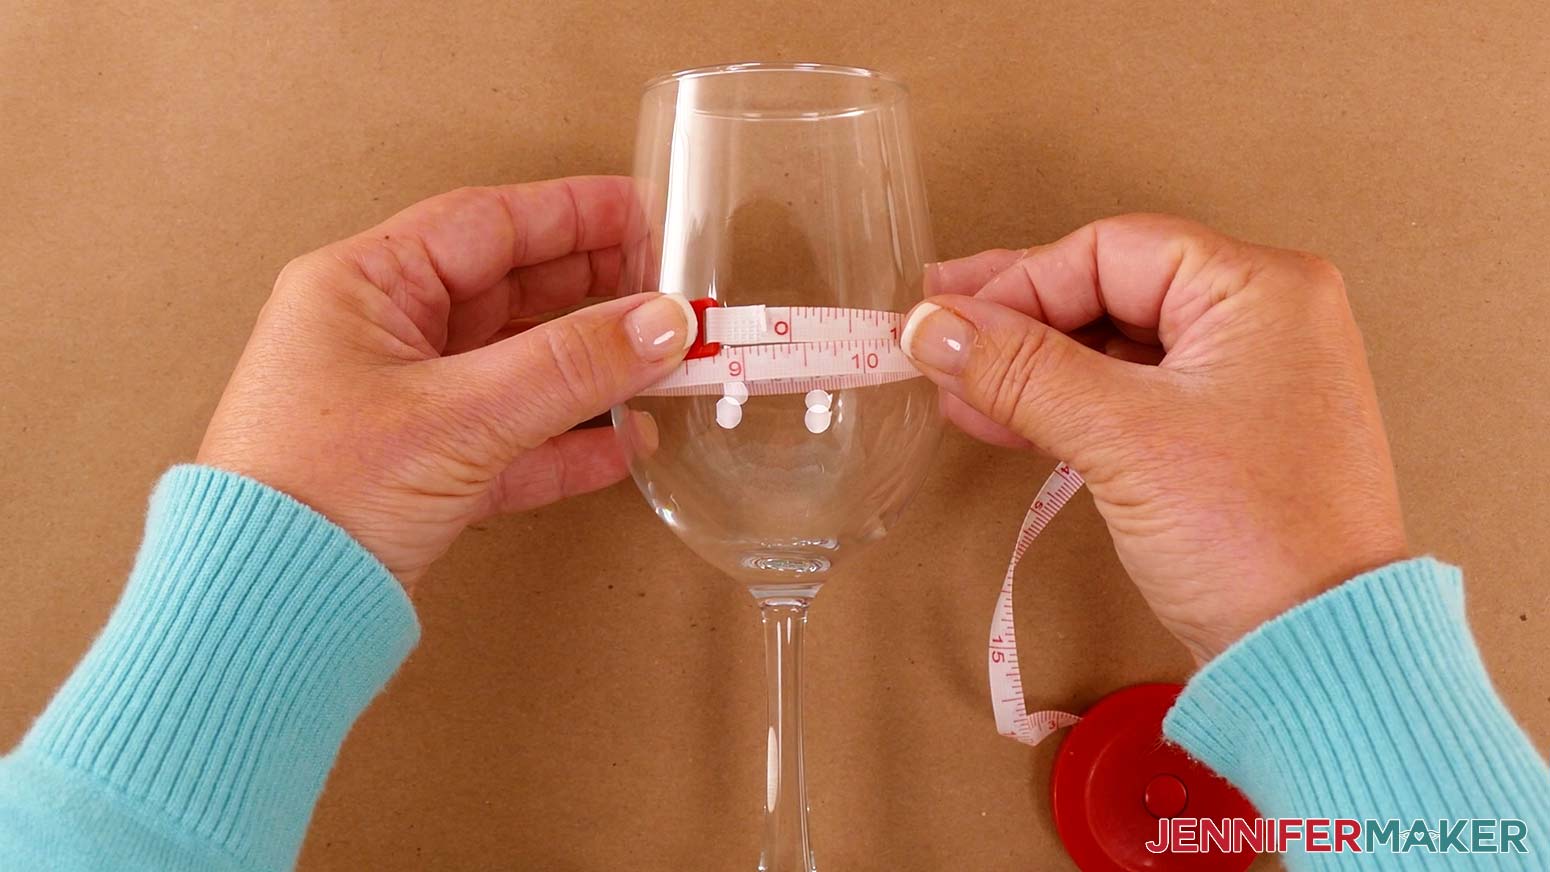 Measure the circumference of your wine glass with measuring tape to determine the width of your design. The glasses I used are about 9.5 inches in circumference at the widest point.